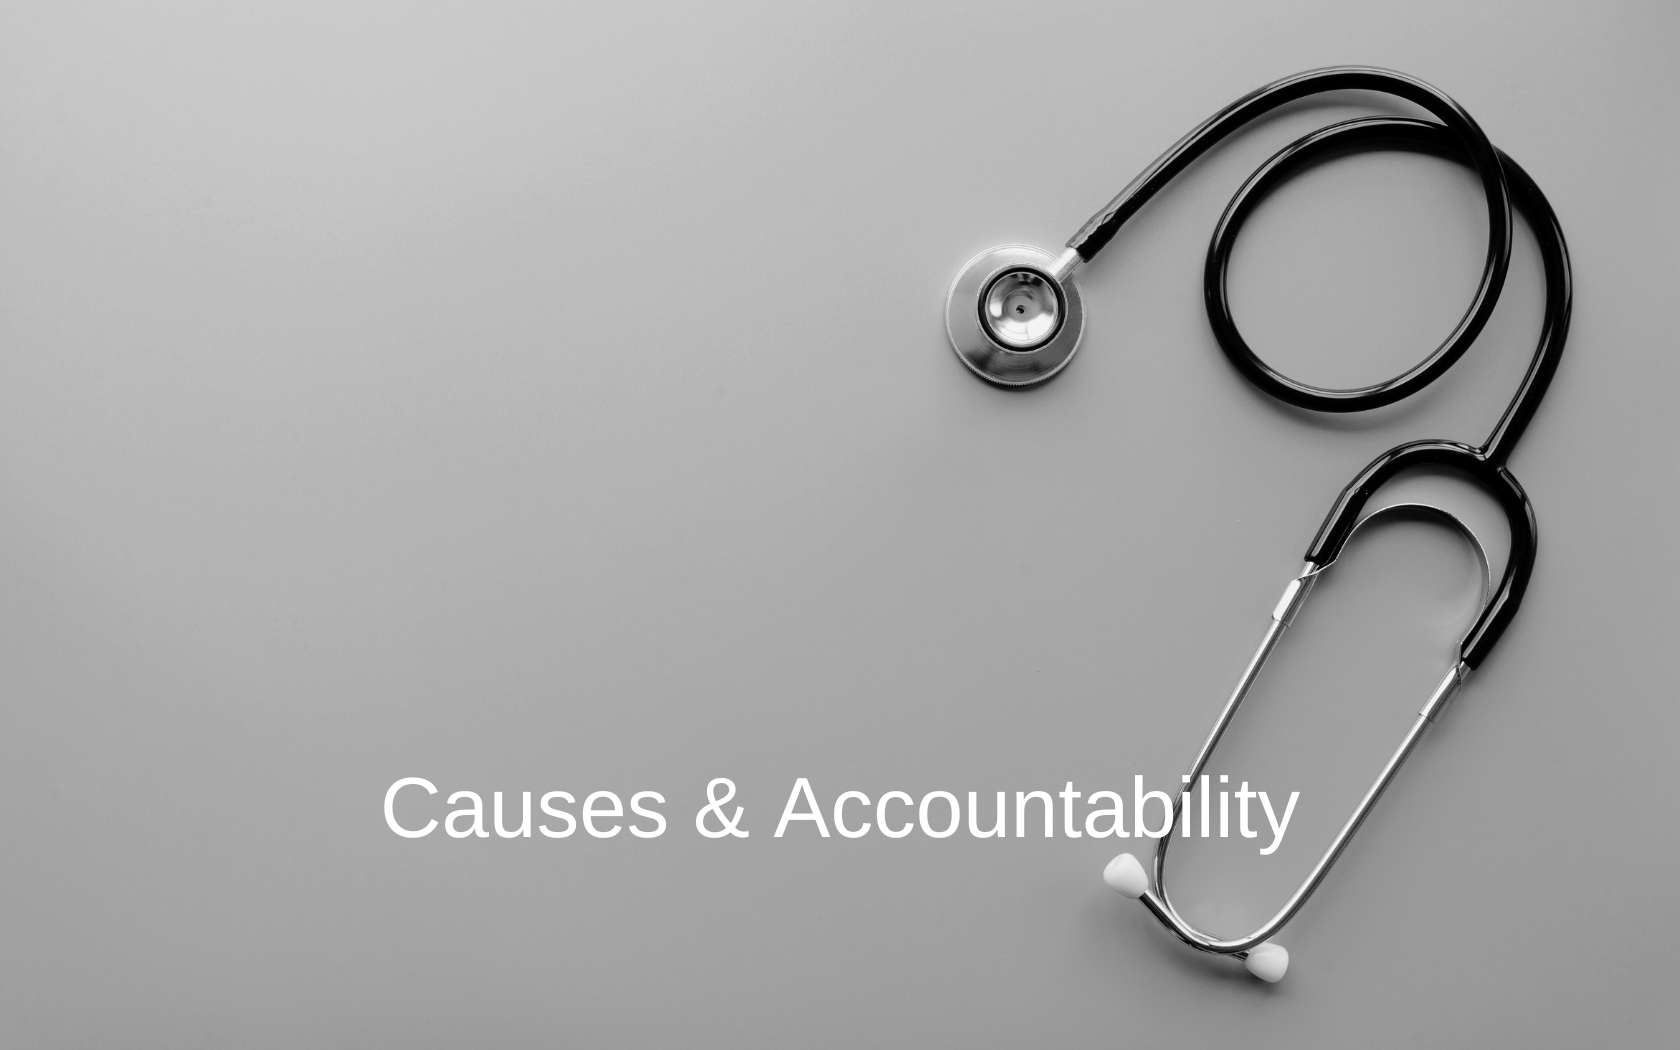 Causes and accountability for HIE.